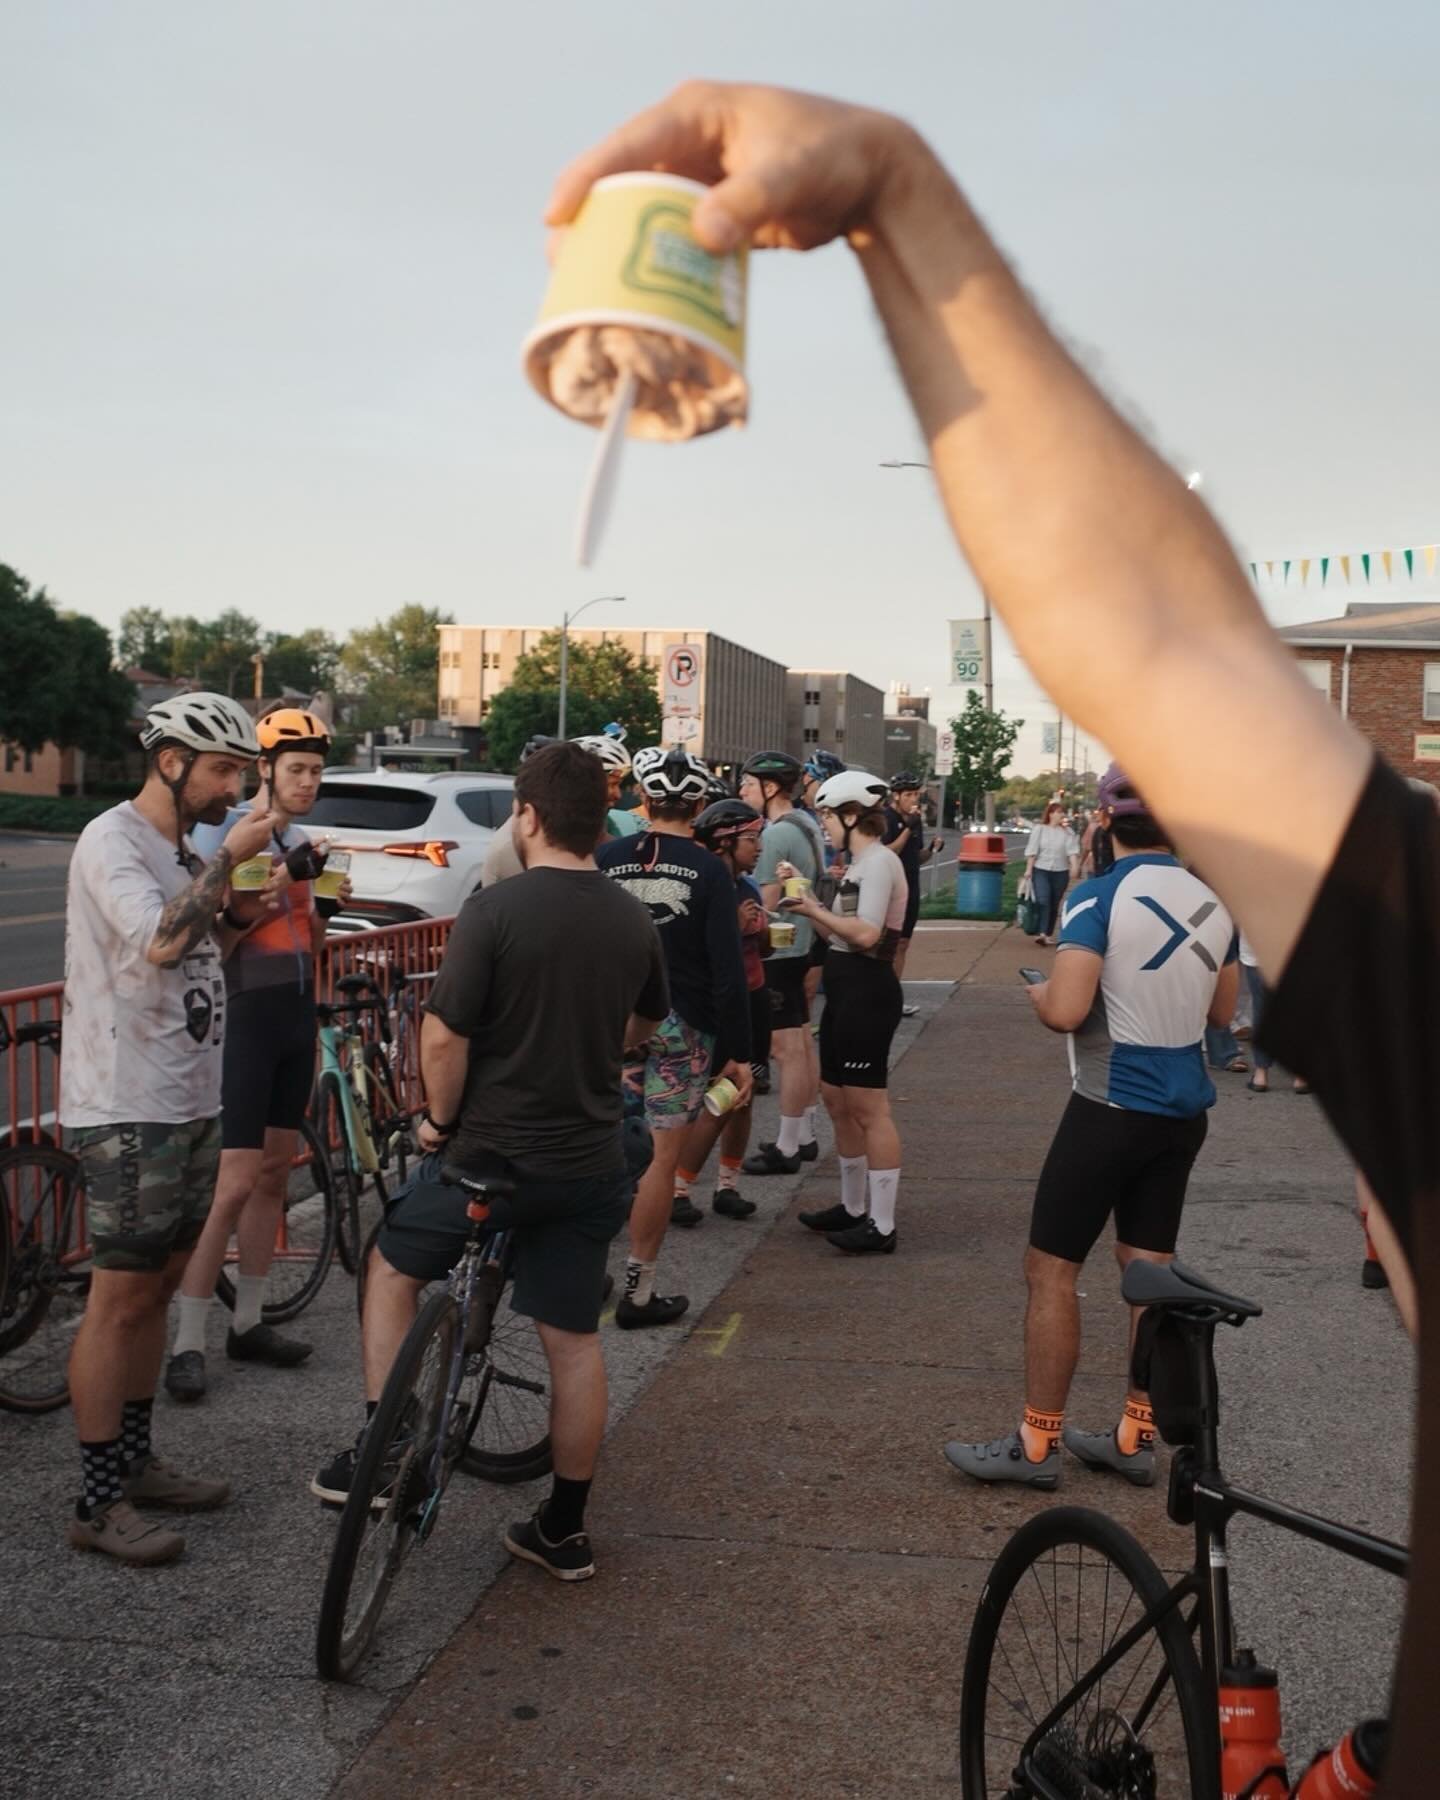 Last night's Monday Night Social Ride was a VIBE! The weather was perfect, and we stopped at the iconic St. Louis staple, @teddrewes_frozencustard's, for a mid-ride treat. Congratulations to them for 95 years and counting! We plan on &ldquo;sprinklin